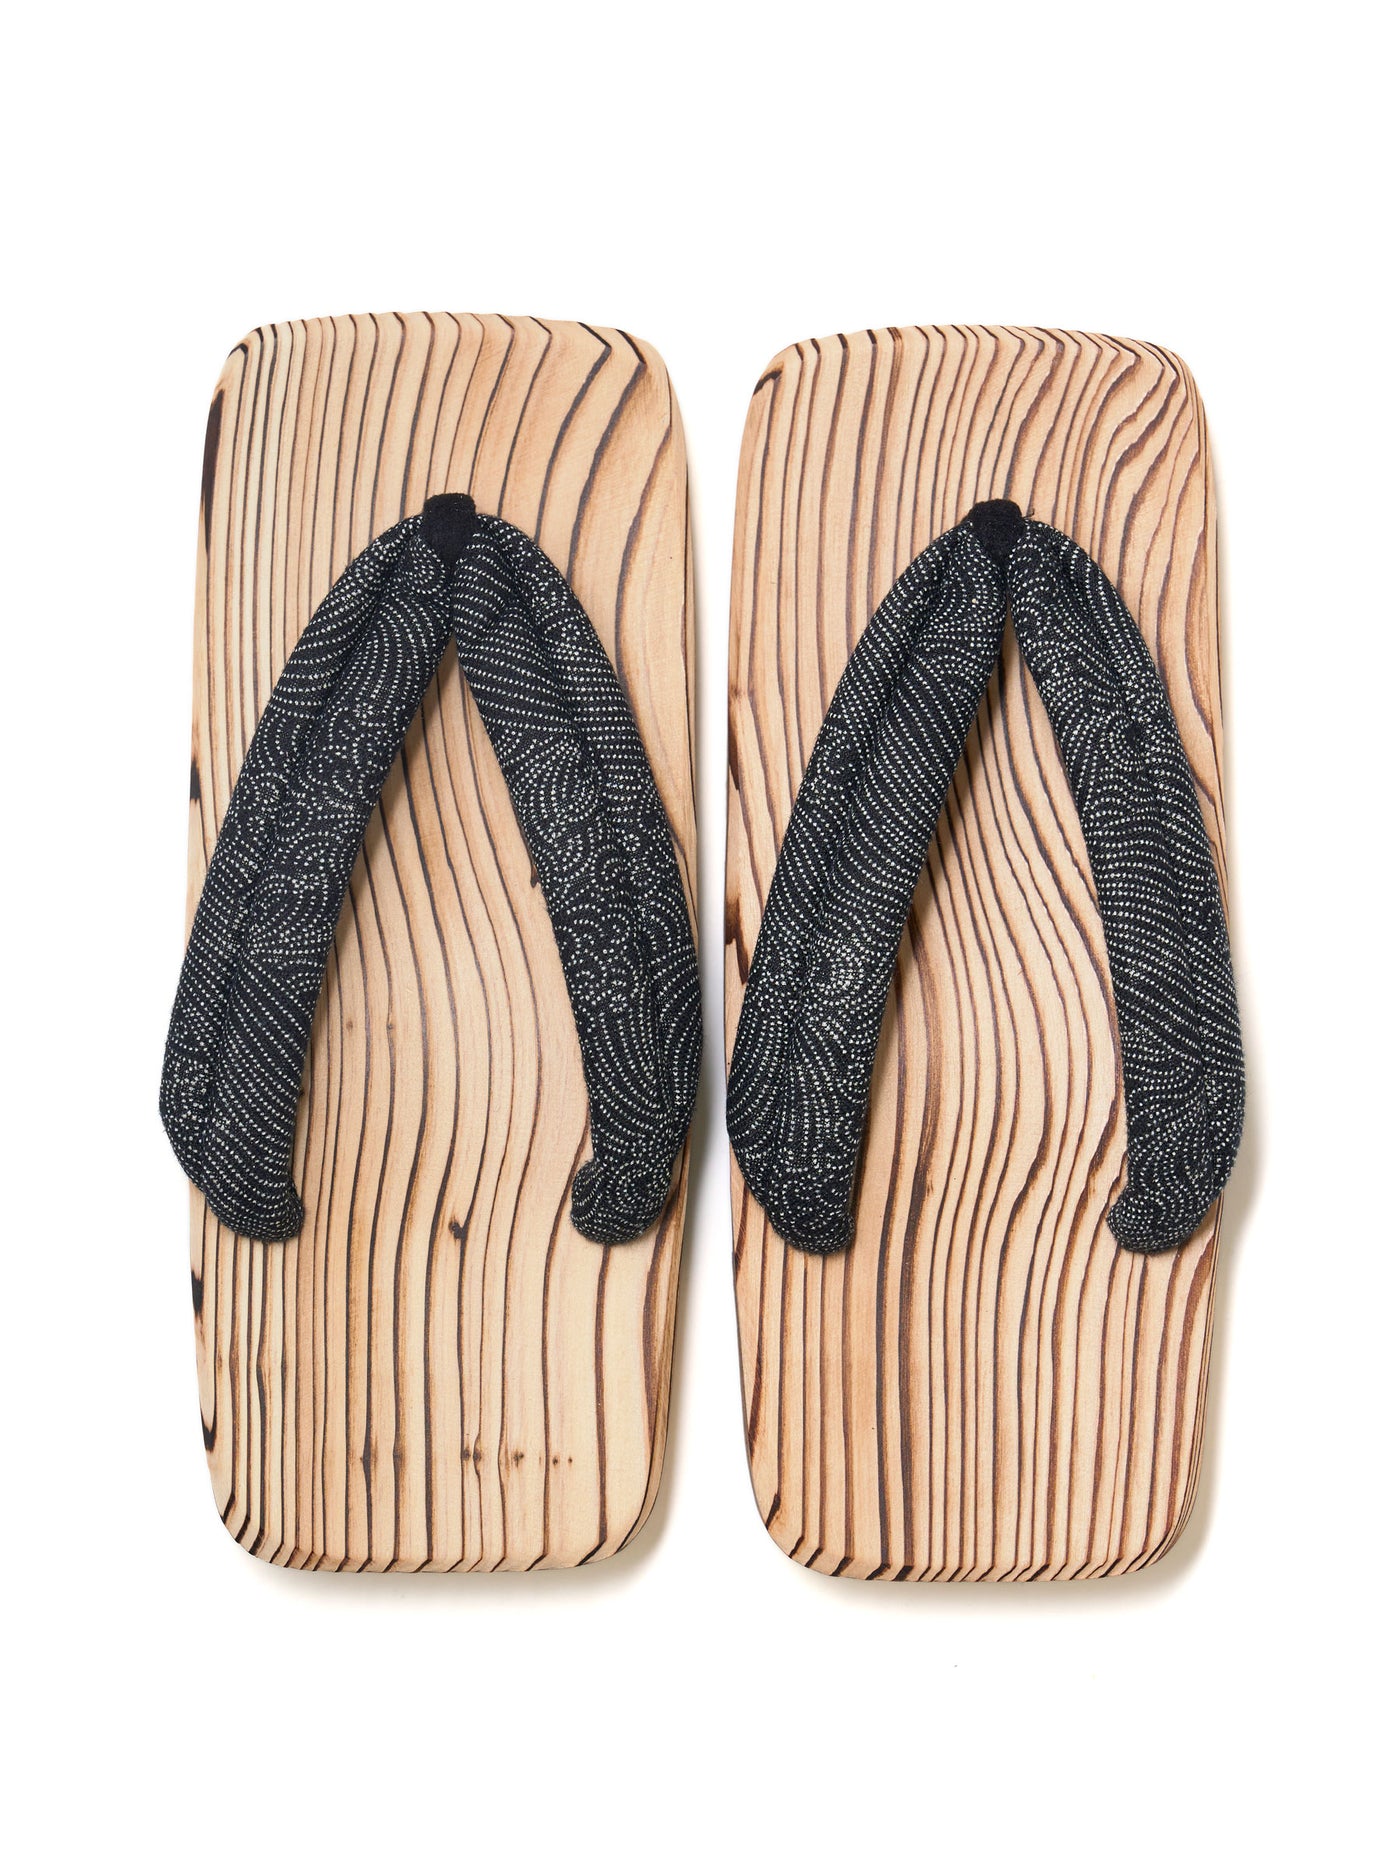 Whoholl Original Geta Japanese Lady Clogs Flip Flops Summer Wedge Sandals  Cool Wooden Geta Indoor Kimono Slippers For Female - Shoes - AliExpress